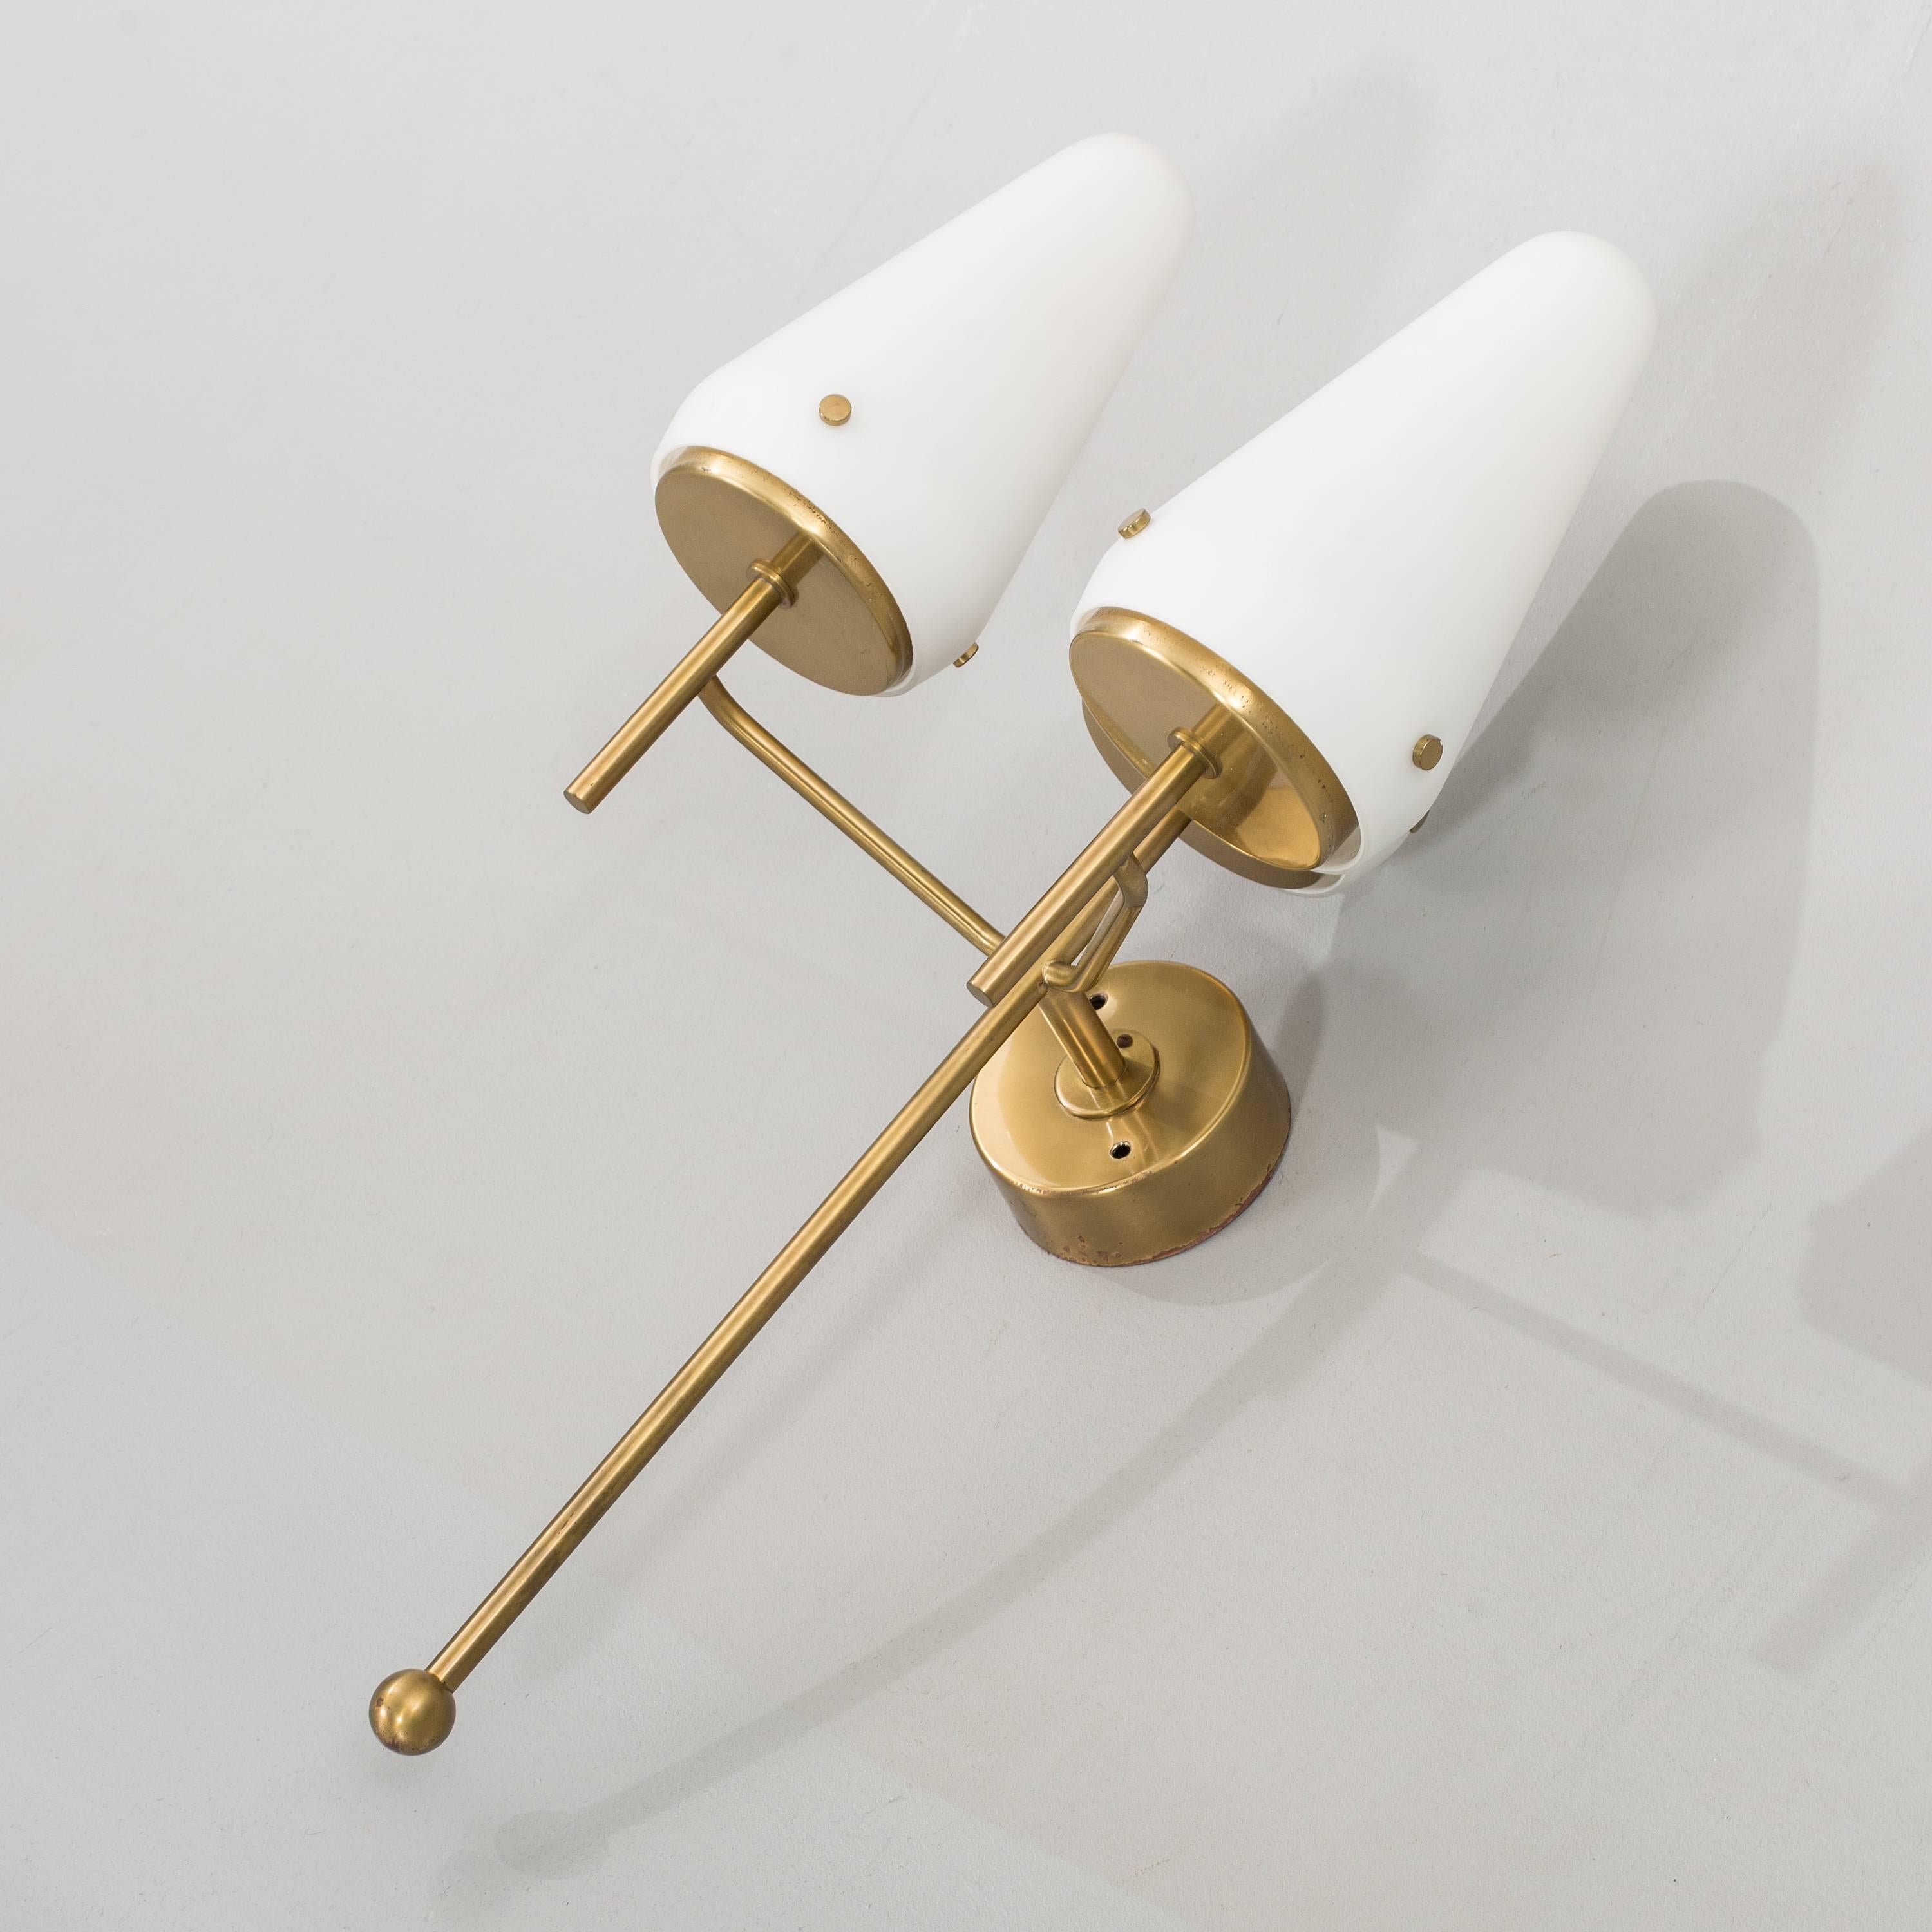 Rare and large wall light by Hans-Agne Jakobsson;
Sweden, circa 1960;
Brass; opaline glass.